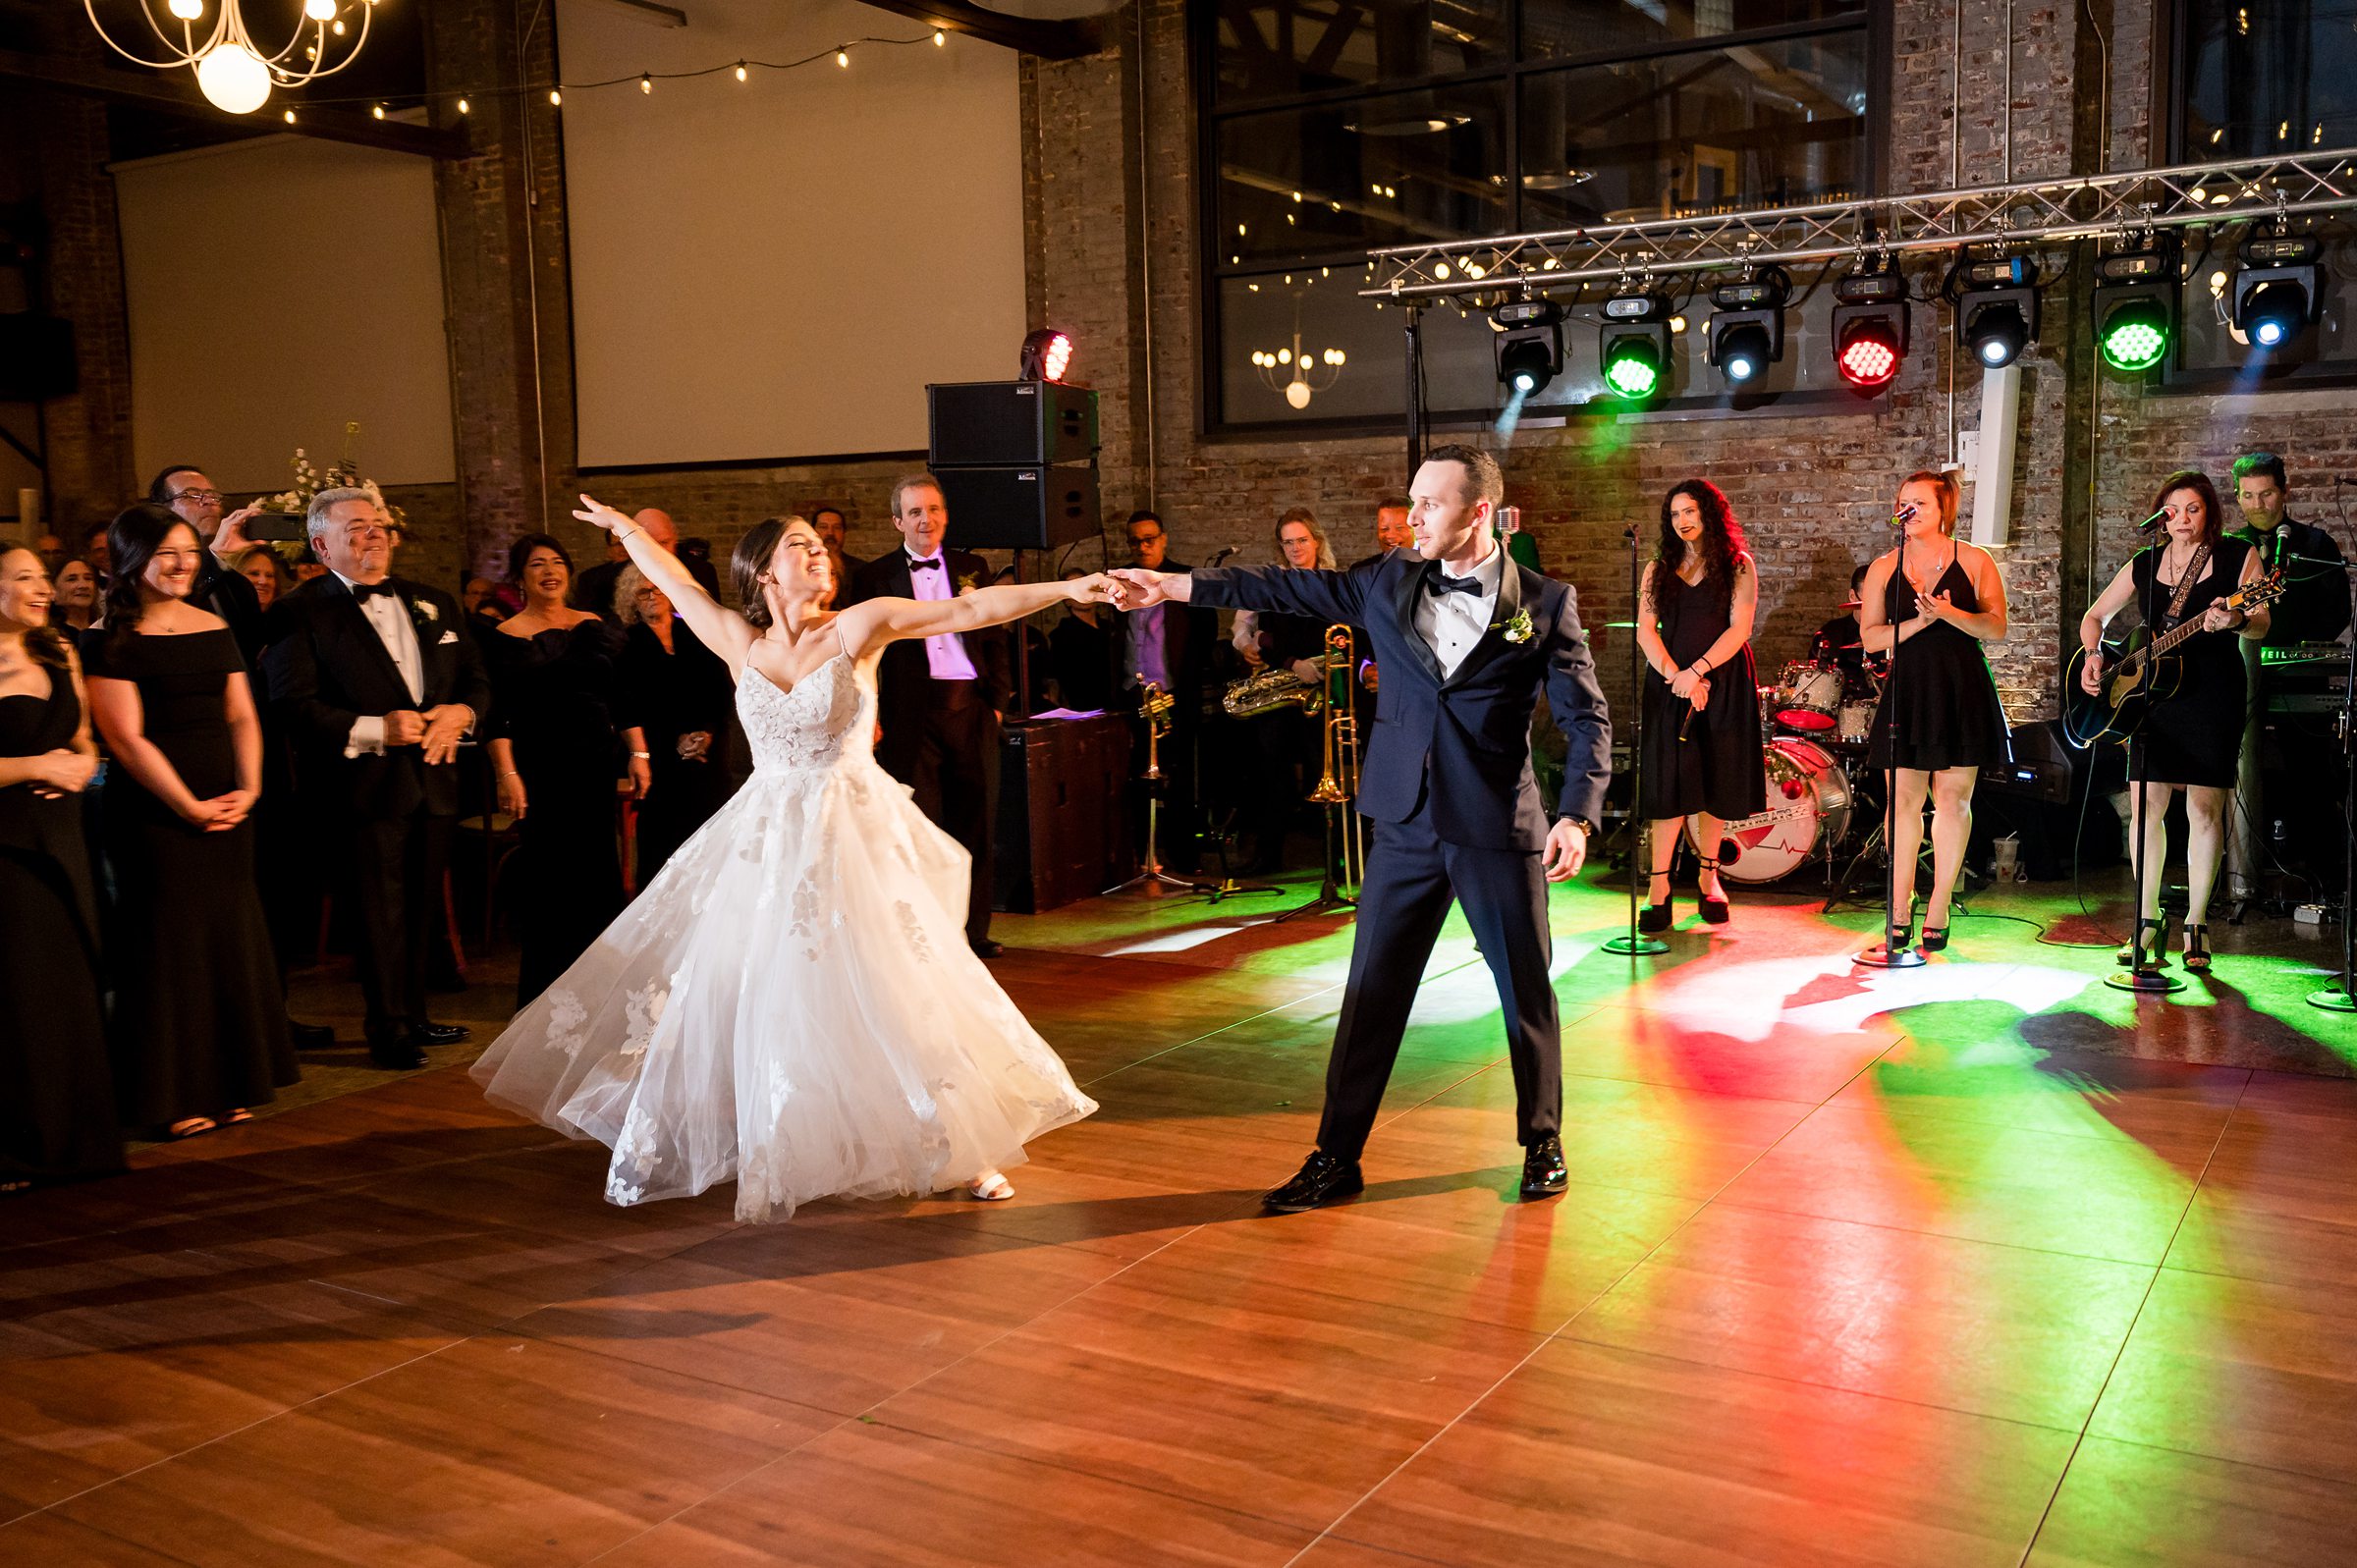 At a Lilah wedding event, the bride and groom share a special dance on the dance floor during their reception.